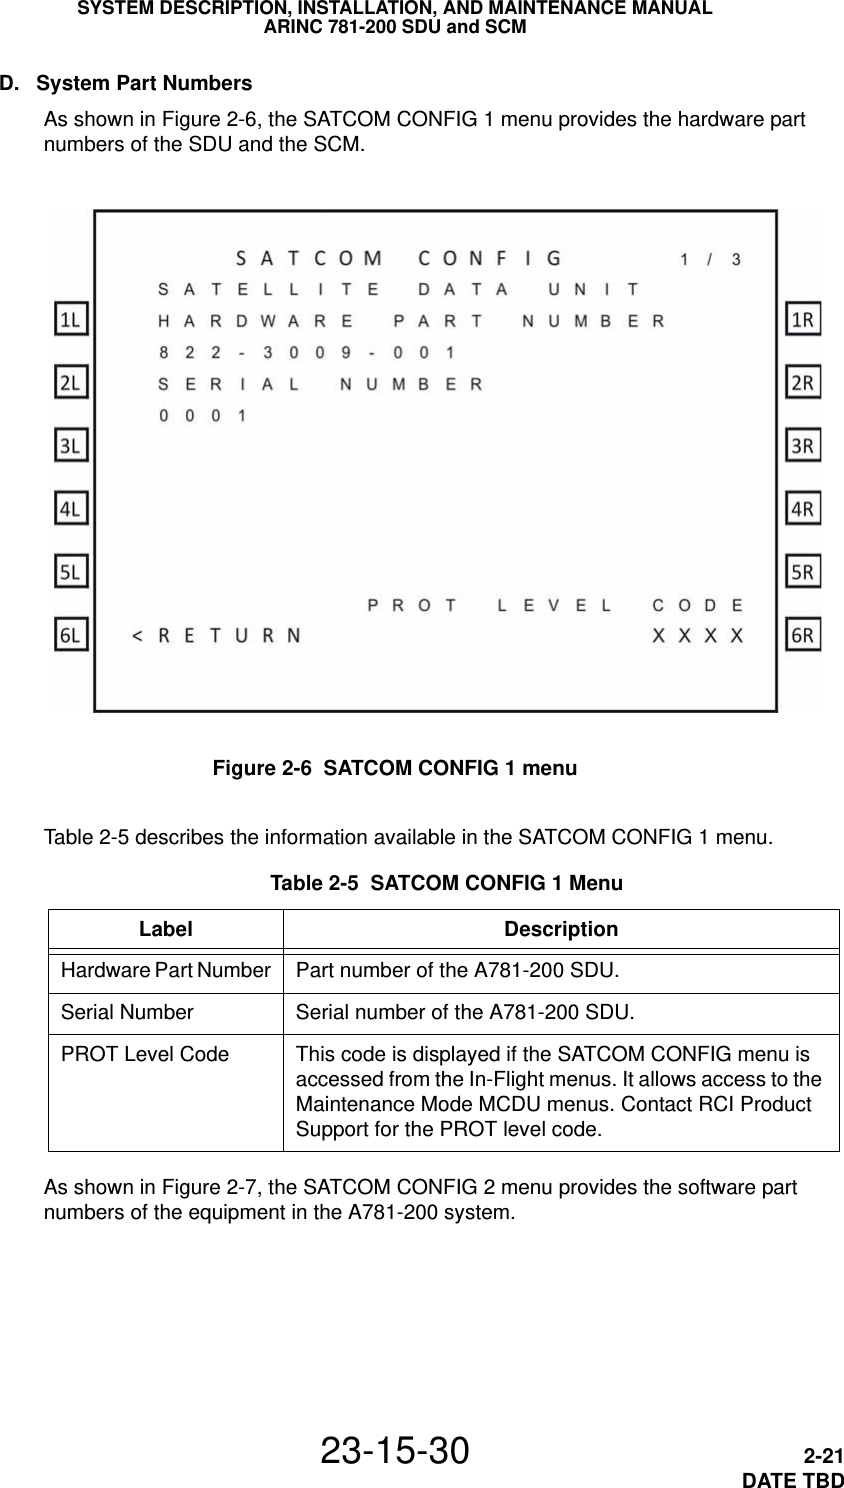 SYSTEM DESCRIPTION, INSTALLATION, AND MAINTENANCE MANUALARINC 781-200 SDU and SCM23-15-30 2-21DATE TBDD. System Part NumbersAs shown in Figure 2-6, the SATCOM CONFIG 1 menu provides the hardware part numbers of the SDU and the SCM.Figure 2-6  SATCOM CONFIG 1 menu Table 2-5  SATCOM CONFIG 1 MenuLabel DescriptionHardware Part Number Part number of the A781-200 SDU.Serial Number Serial number of the A781-200 SDU.PROT Level Code This code is displayed if the SATCOM CONFIG menu is accessed from the In-Flight menus. It allows access to the Maintenance Mode MCDU menus. Contact RCI Product Support for the PROT level code.Table 2-5 describes the information available in the SATCOM CONFIG 1 menu.As shown in Figure 2-7, the SATCOM CONFIG 2 menu provides the software part numbers of the equipment in the A781-200 system.